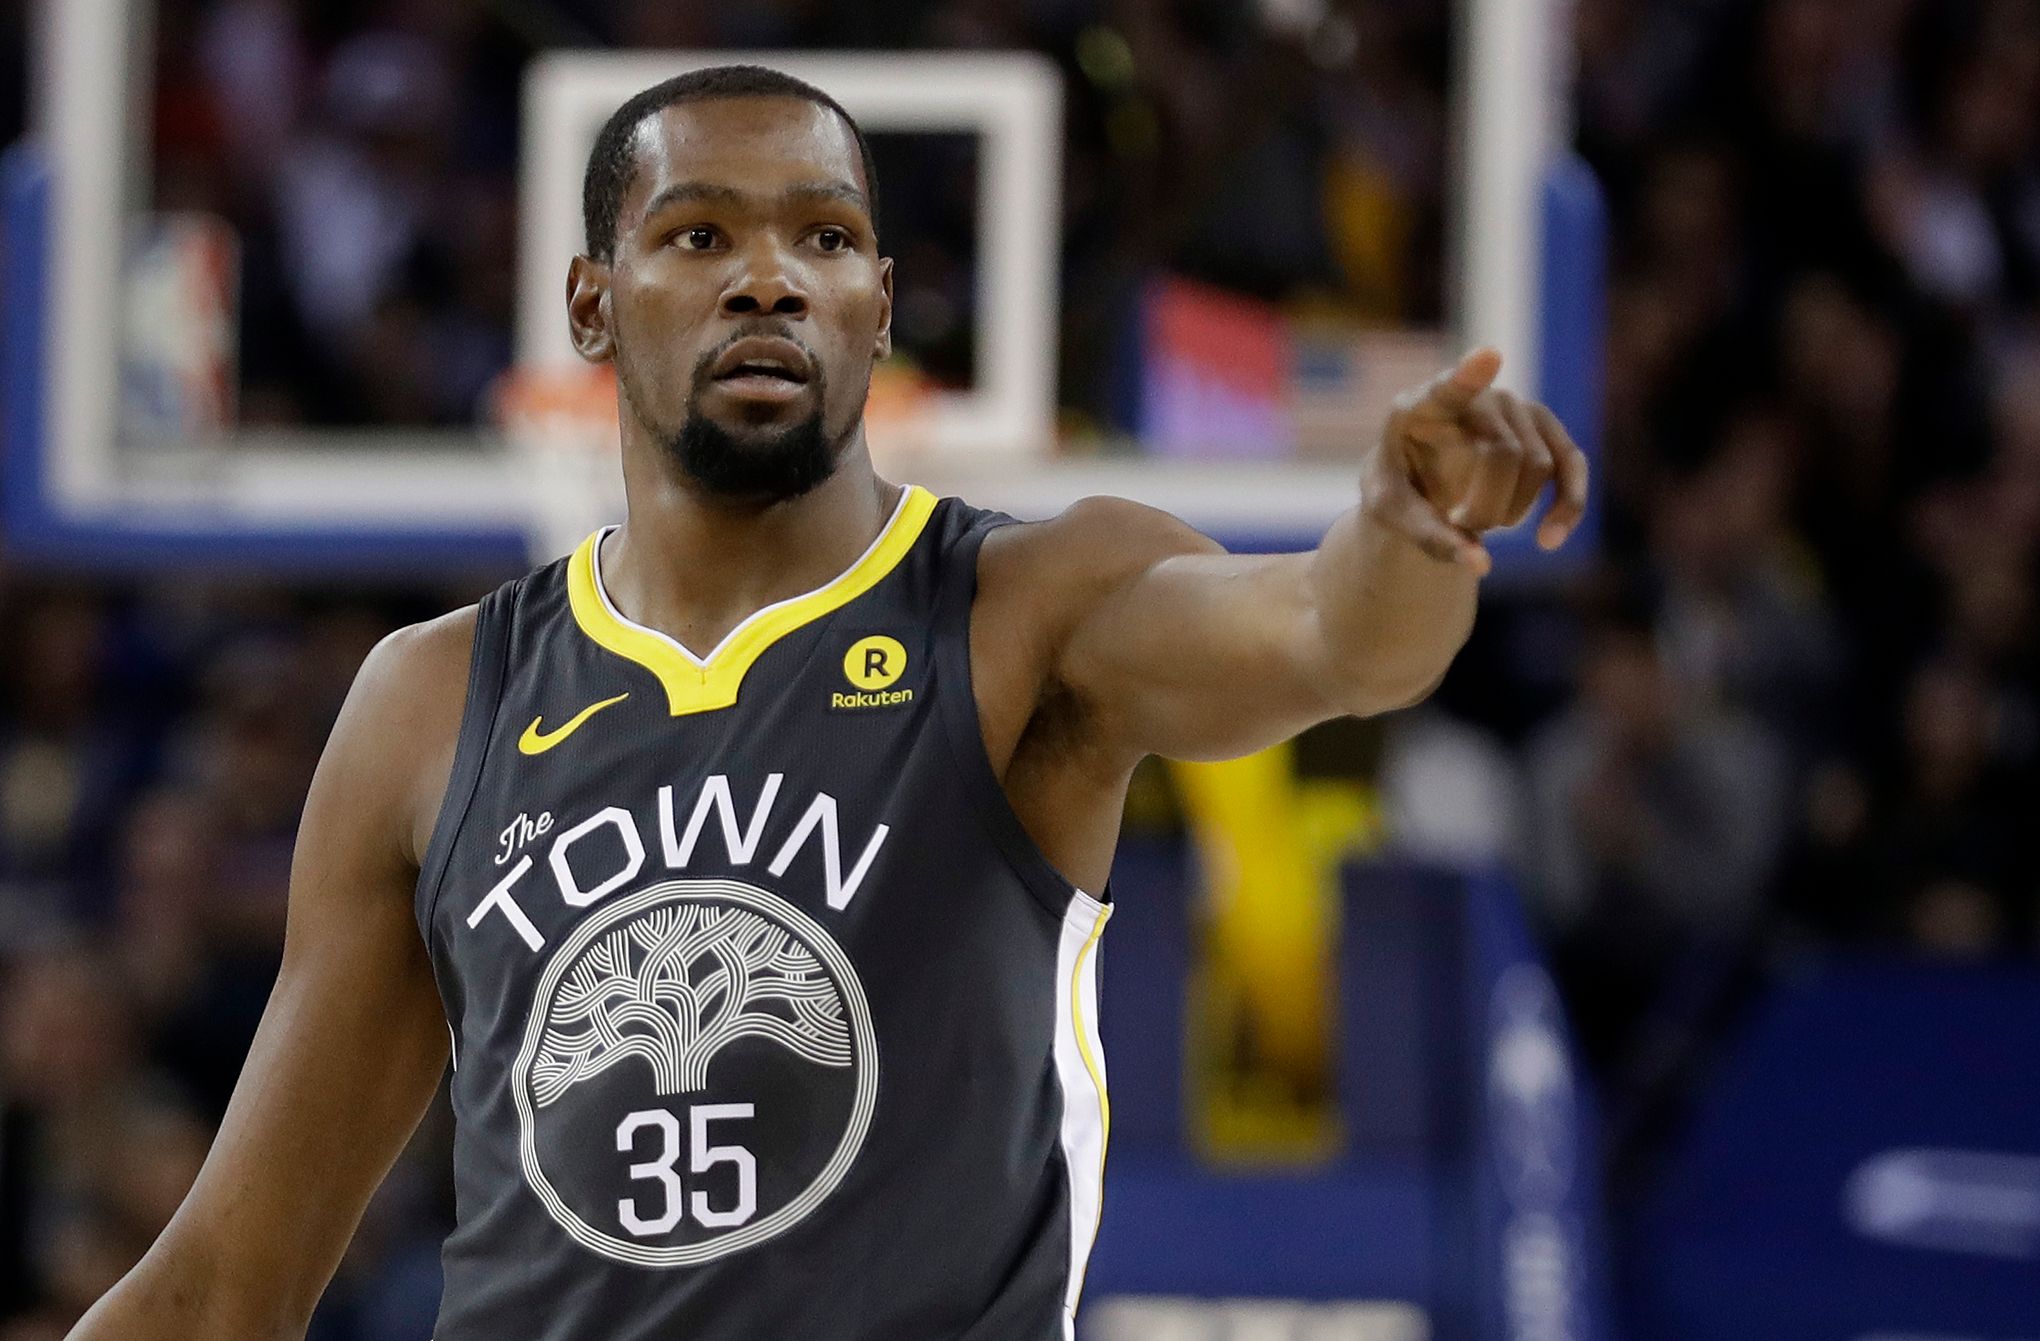 If and when the Sonics return to Seattle, could Kevin Durant come back,  too?